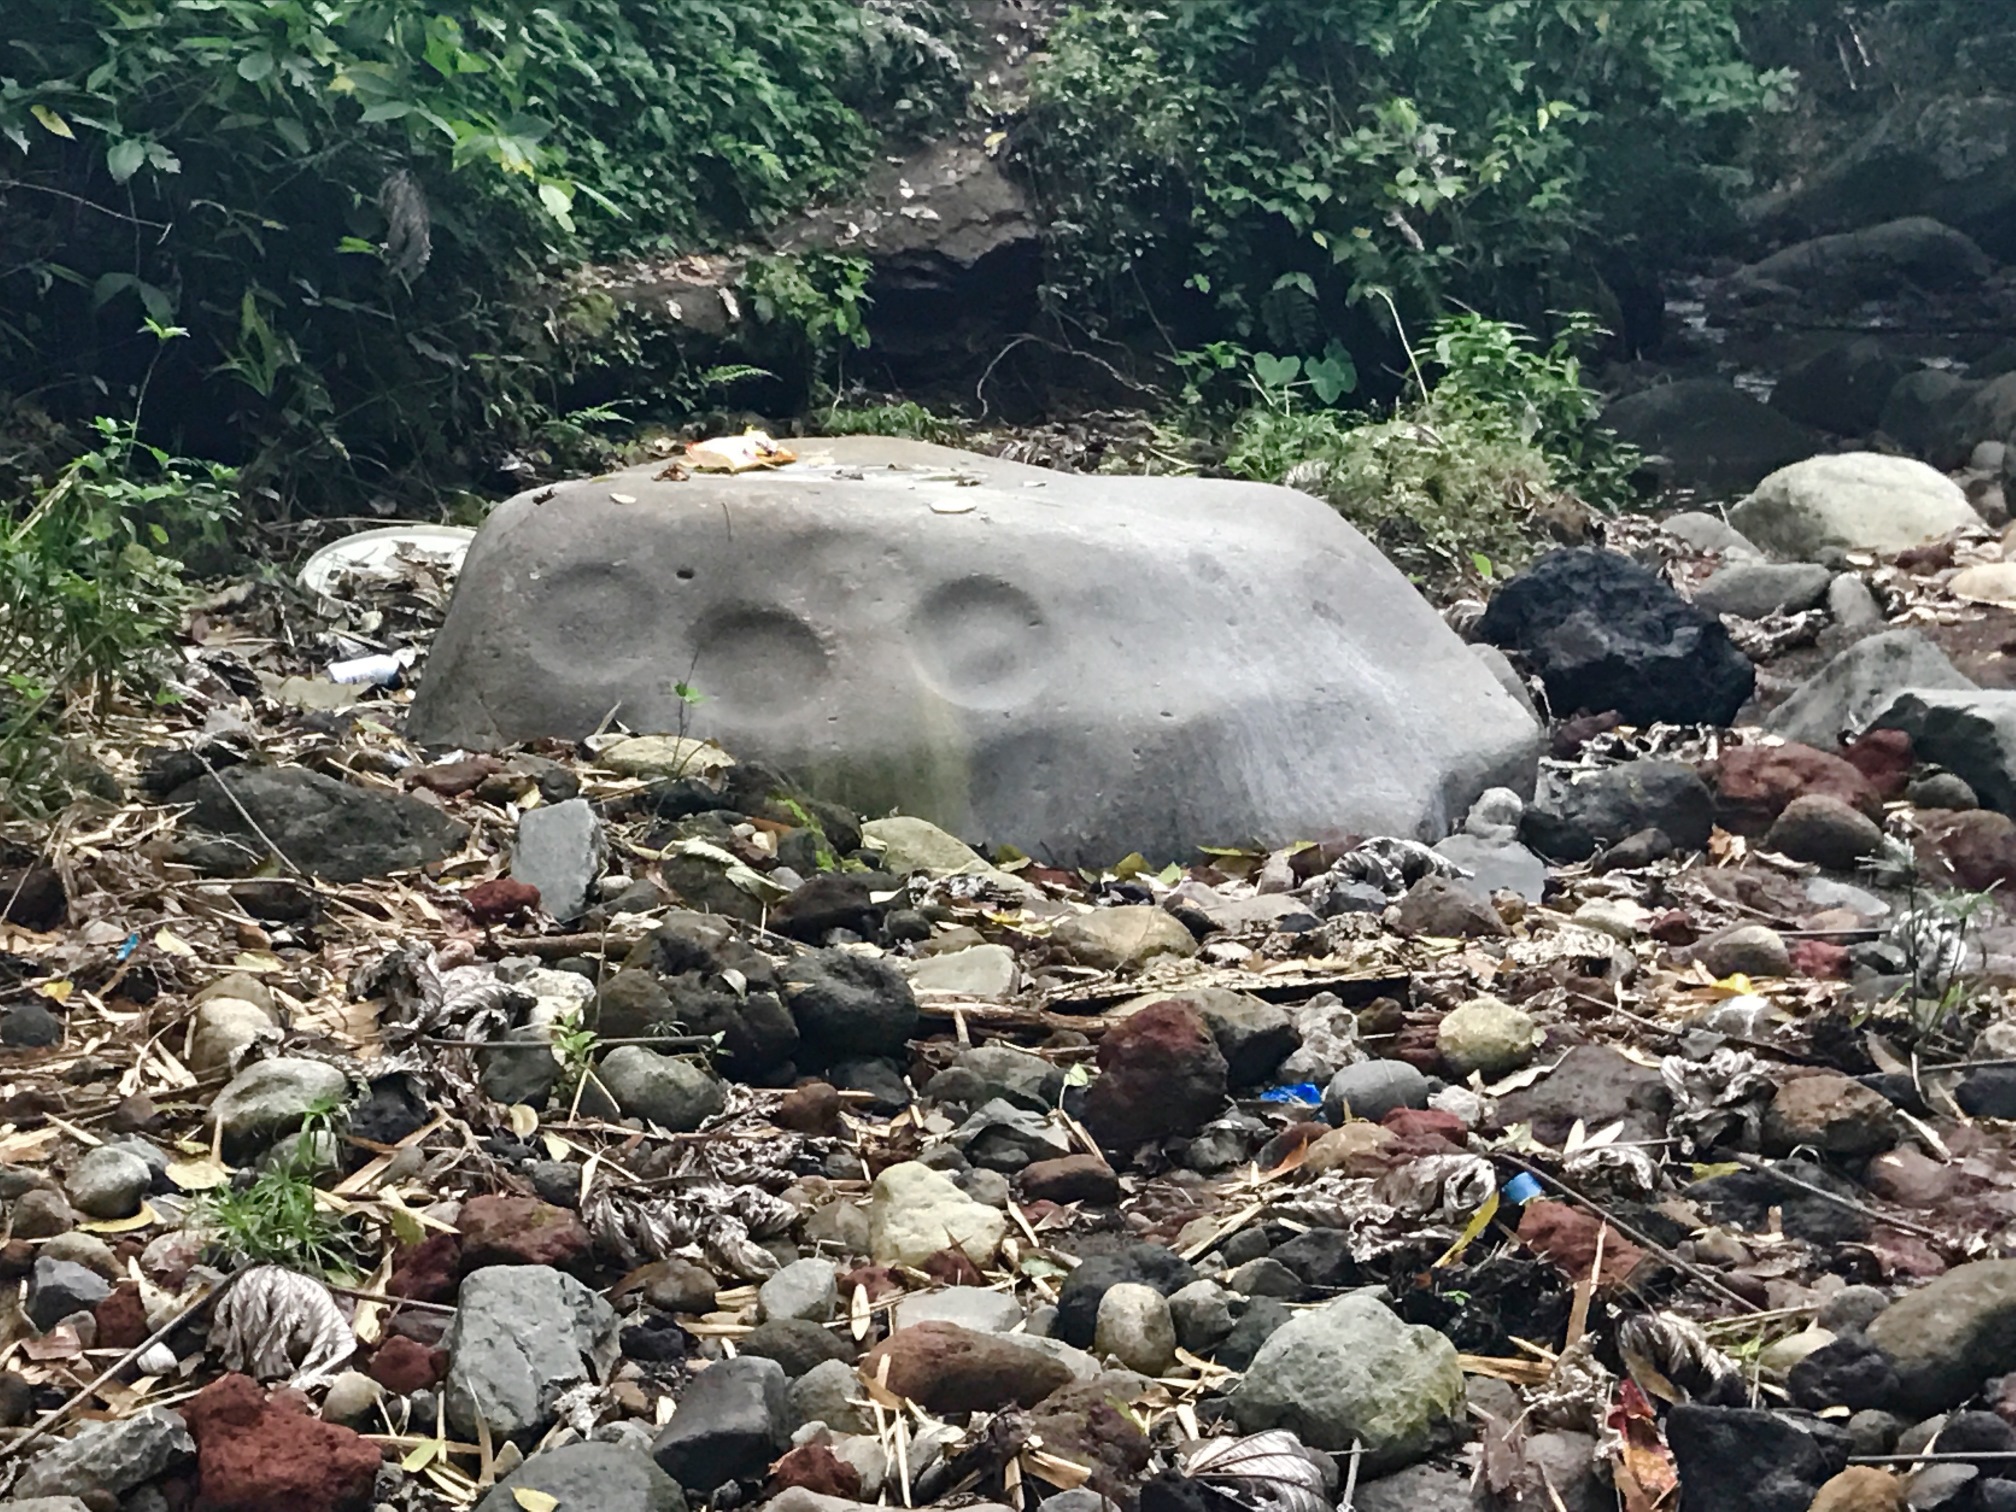 An Amerindian workstone with rounded cupules near the Mt. Rich Carib Stone